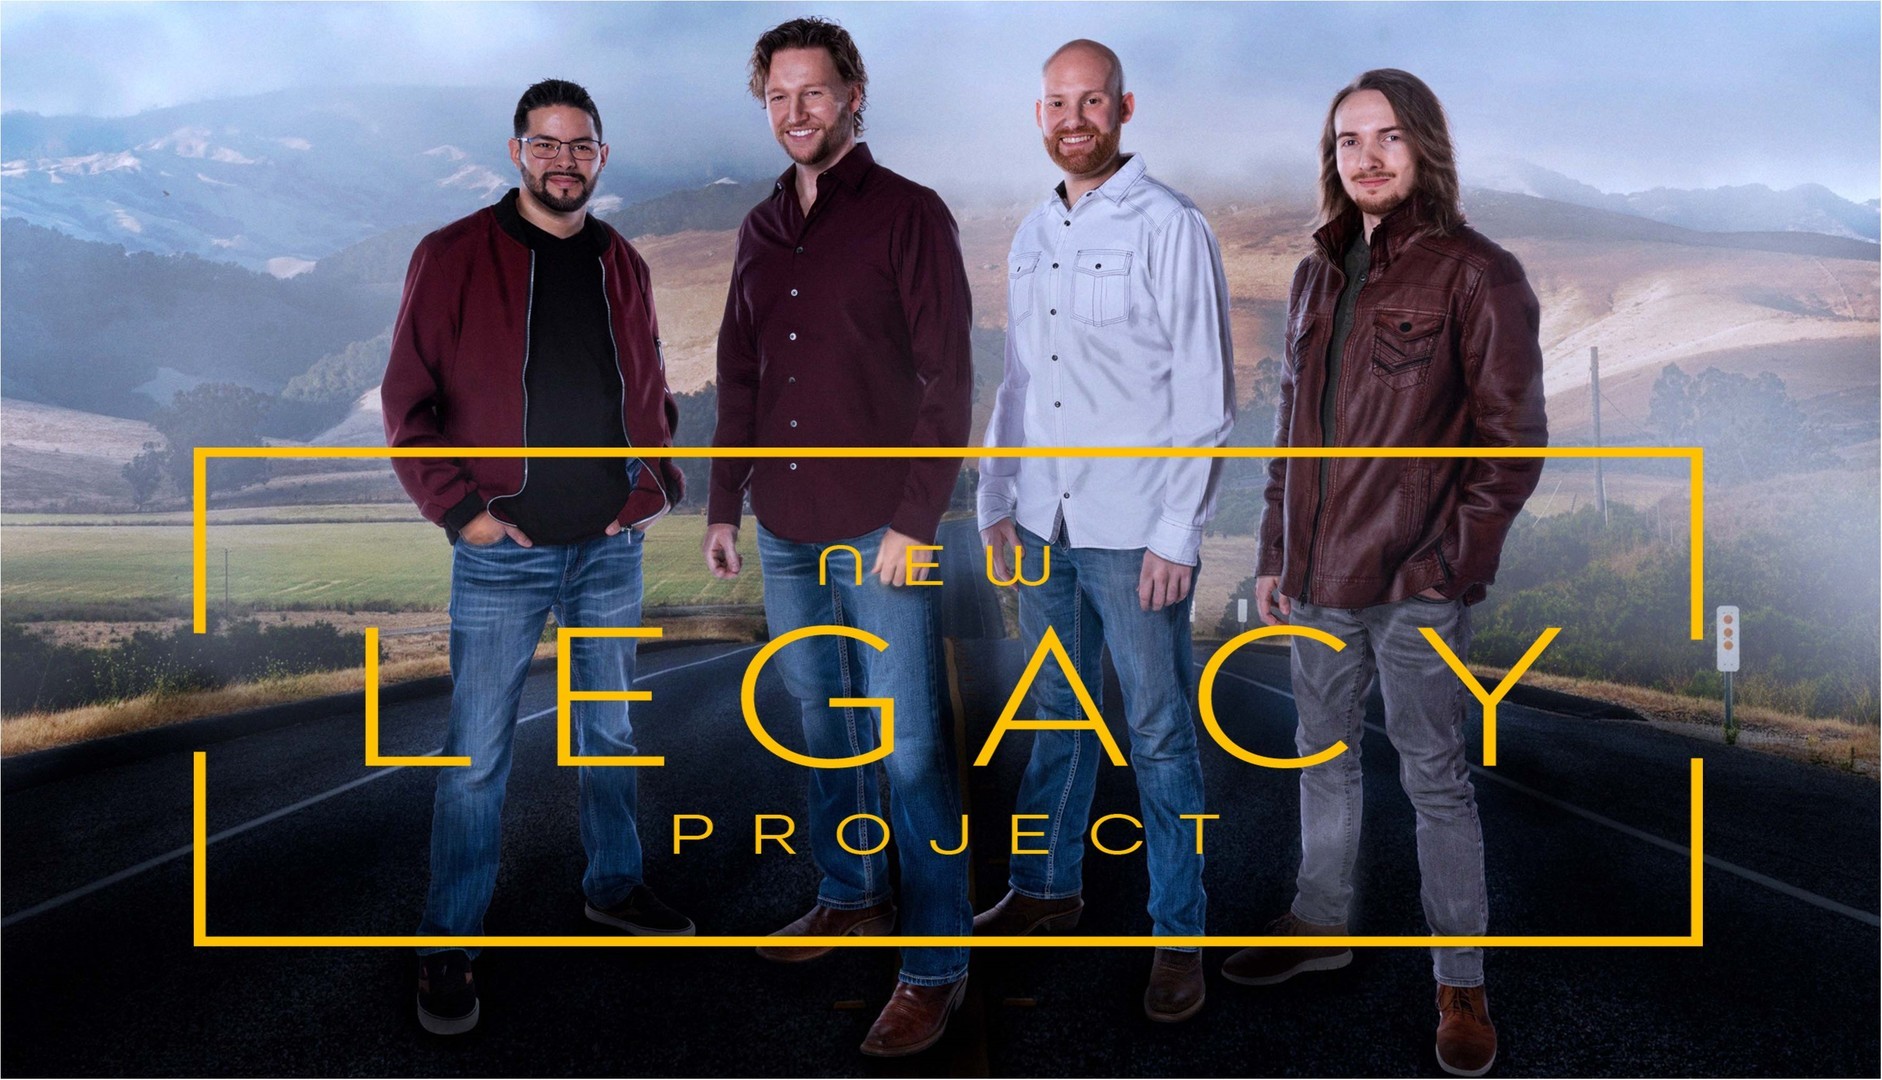 Live Sept Concert in CURTIS with Popular Nashville-based Men's Vocal Band, NEW LEGACY PROJECT, Curtis, Michigan, United States